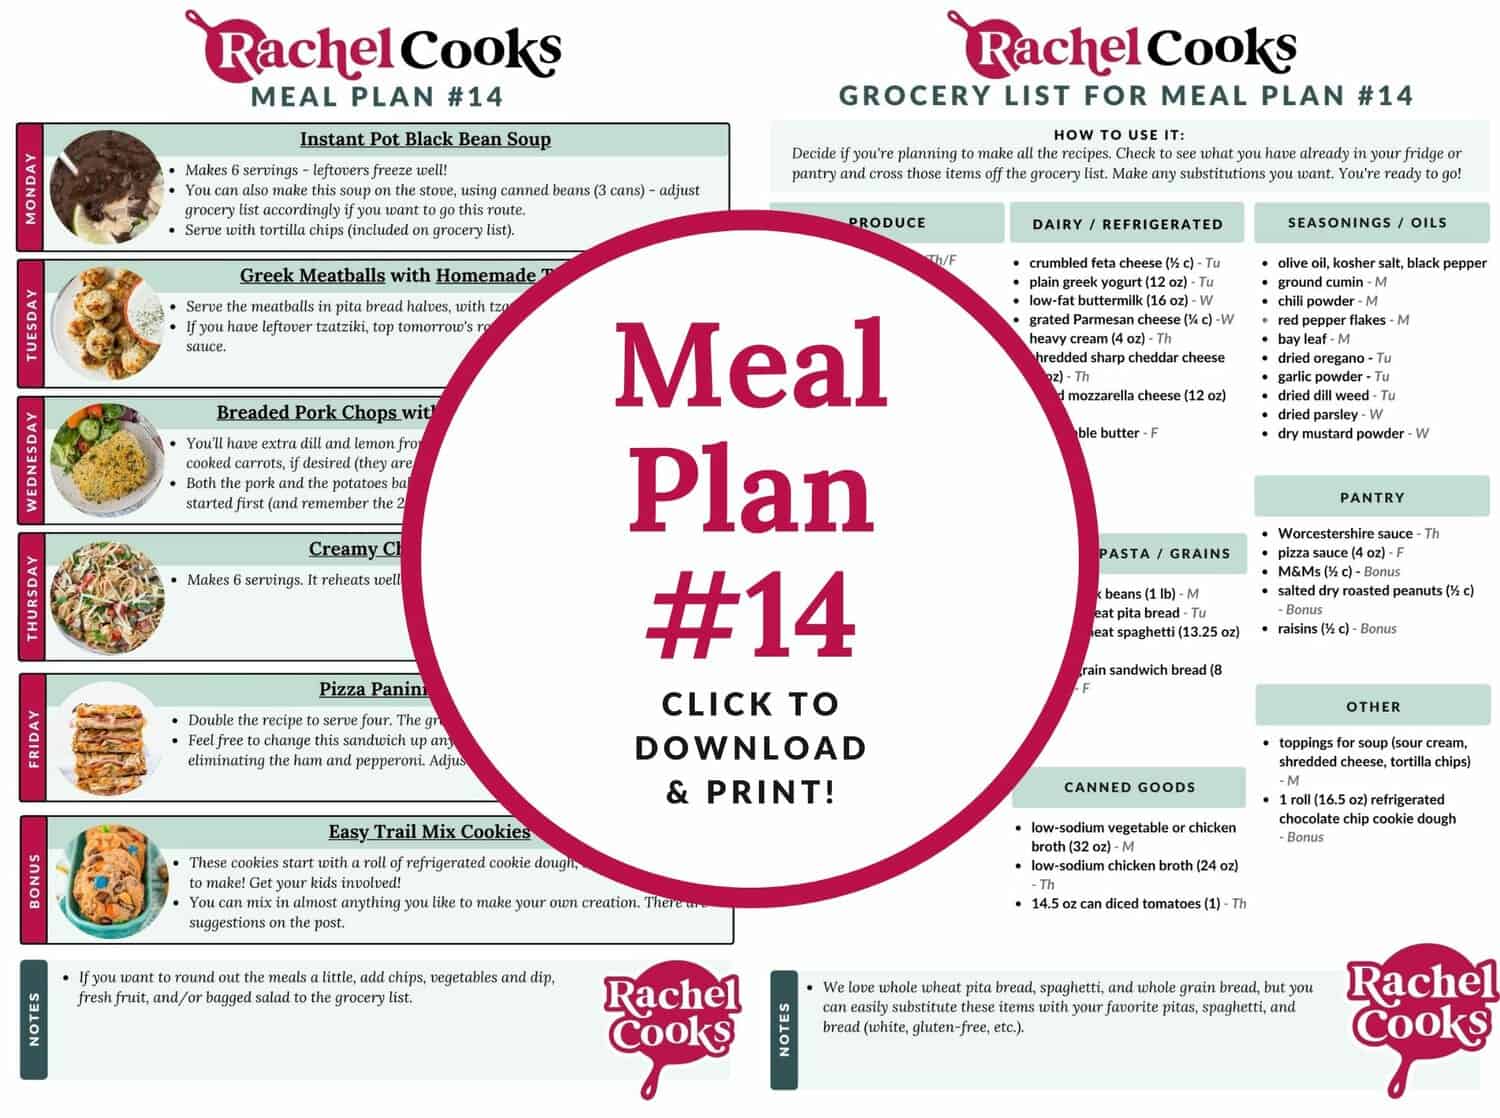 Meal plan 14 preview image graphic.